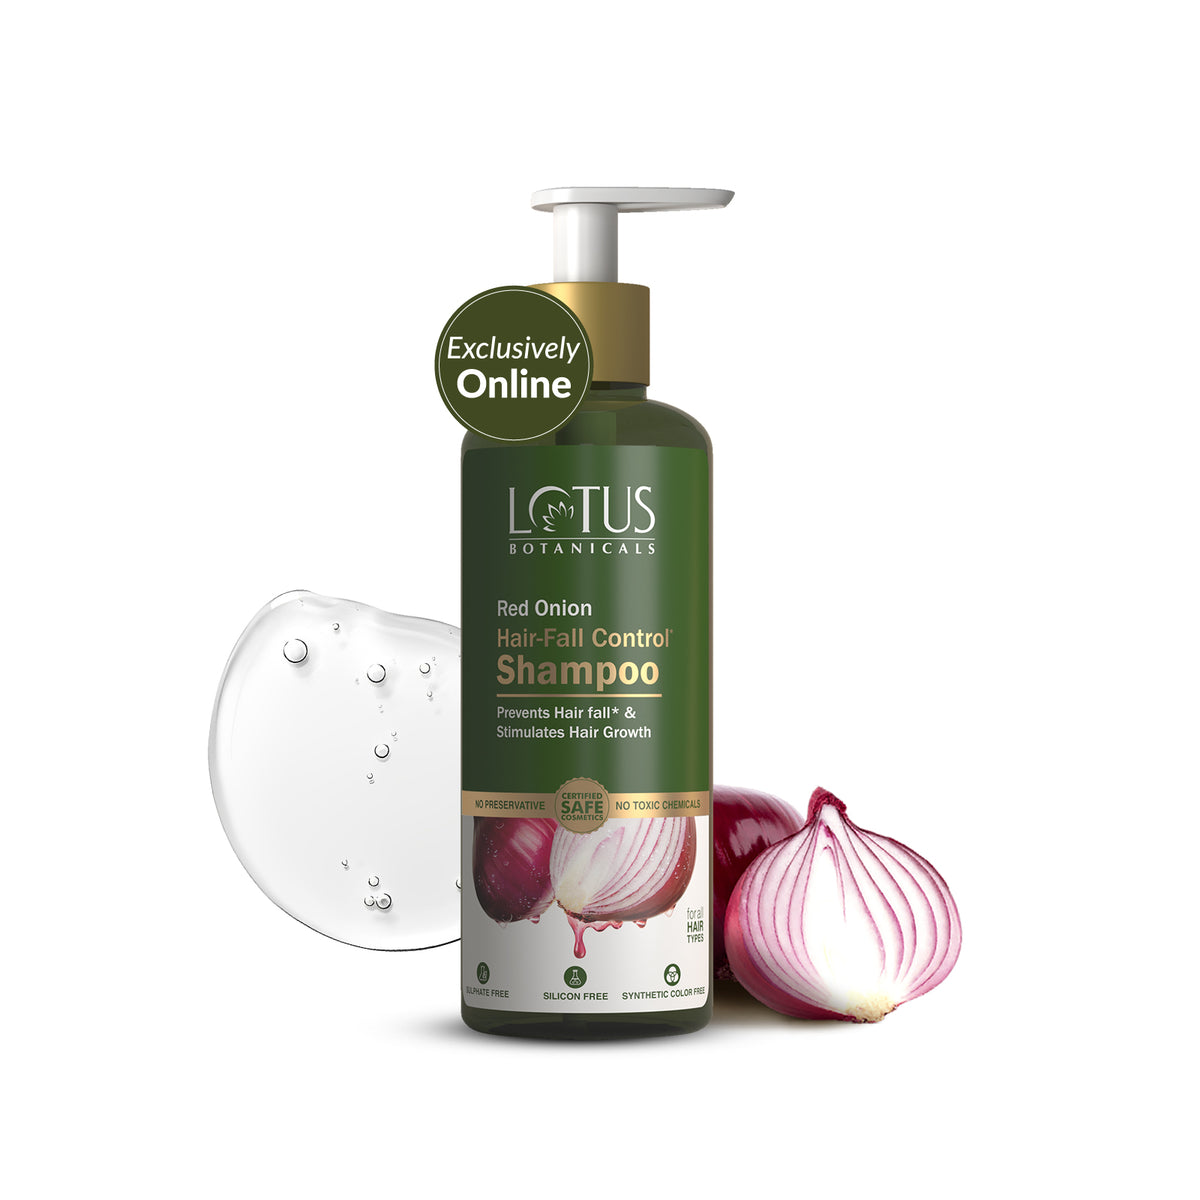 Red Onion Hair-Fall Control Shampoo - Nourishing formula to combat hair loss and promote healthy hair growth